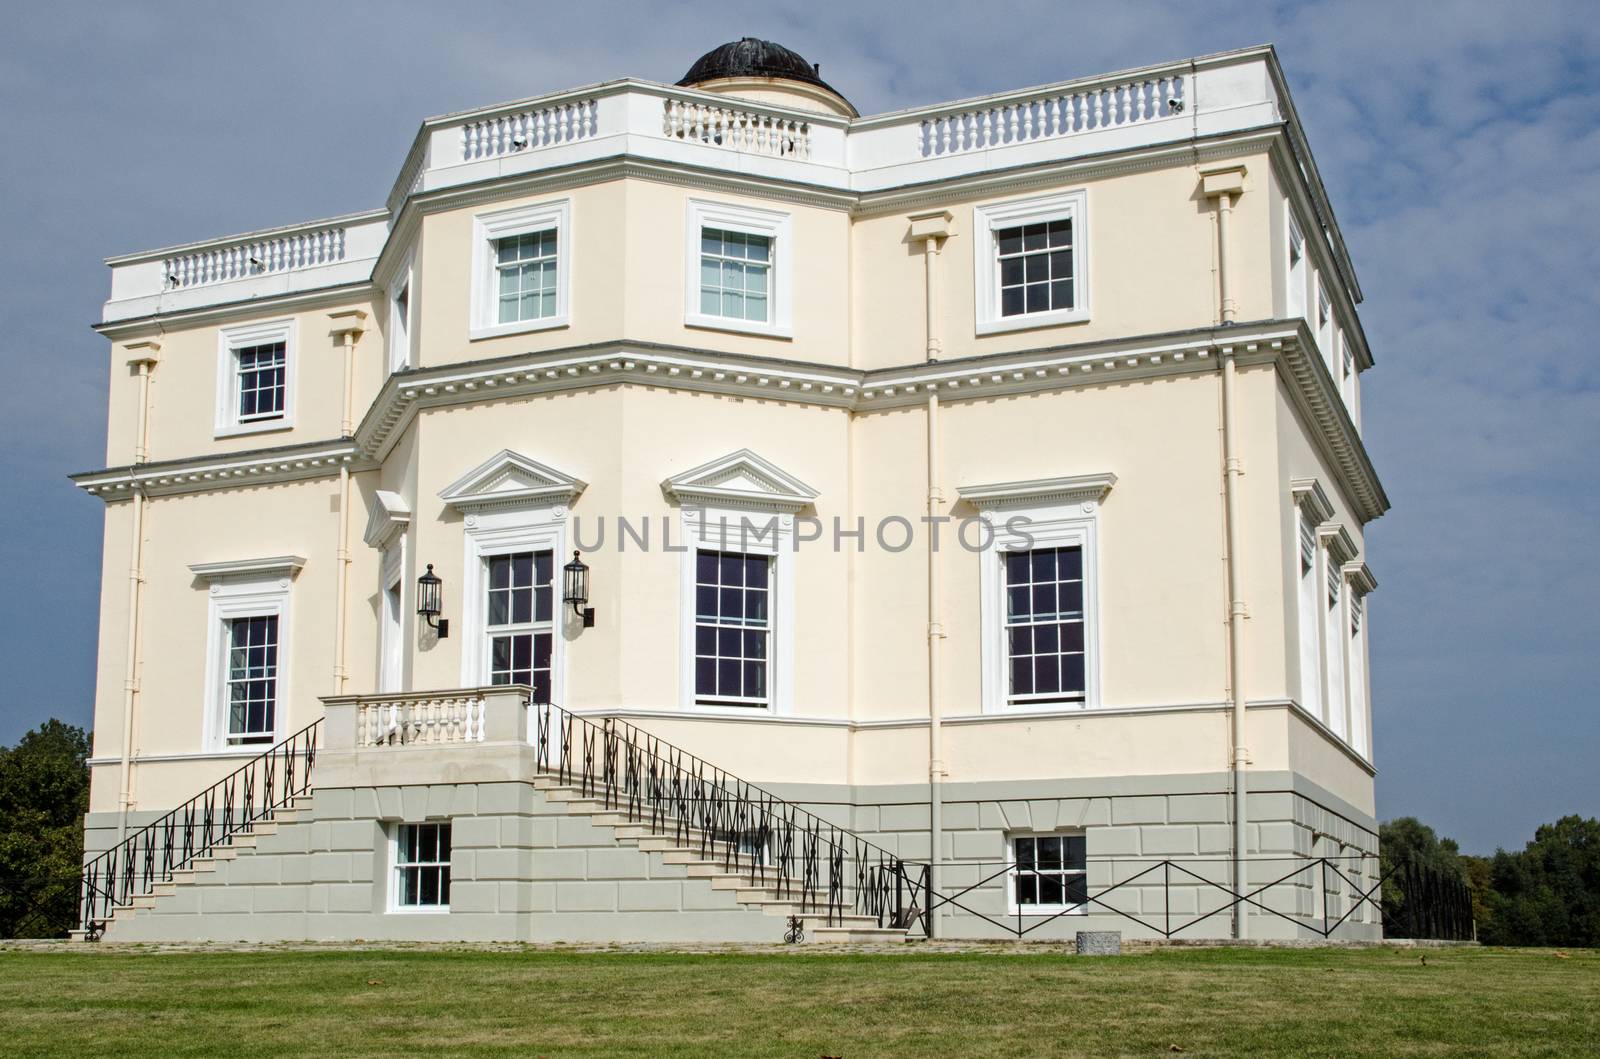 Exterior facade of the historic King's Observatory in the middle of Old Deer Park in Richmond Upon Thames, West London.  Built for King George III to watch the transit of Venus in 1769.